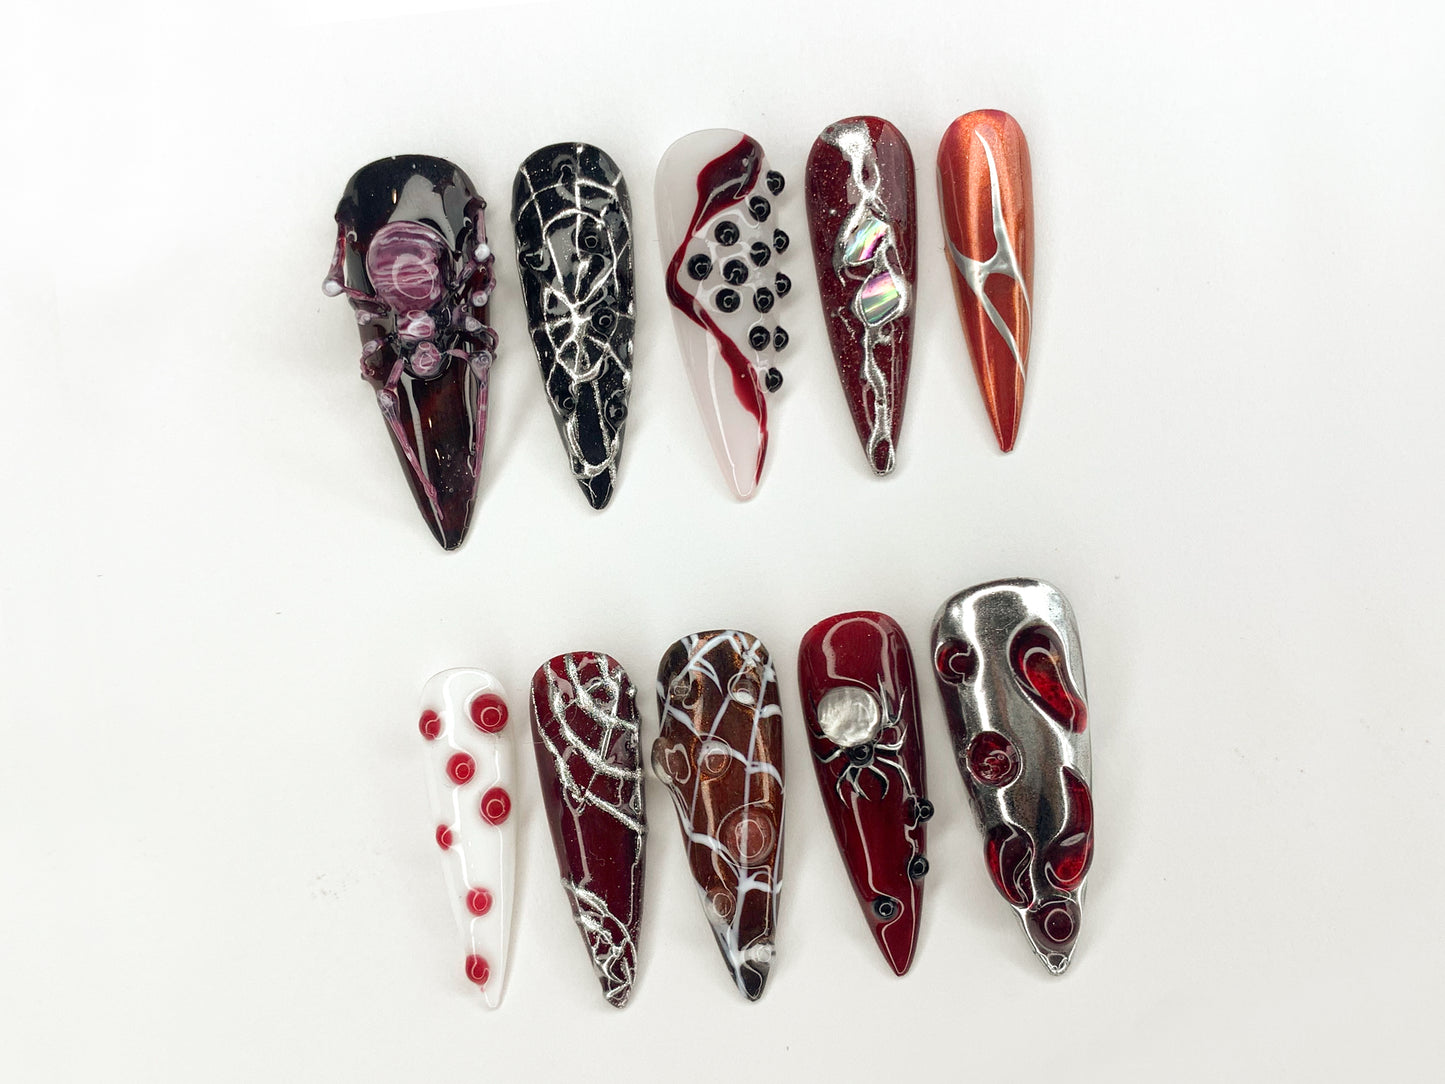 Gothic 3D Nail Art | Spooky Spider Web and Blood Red Designs | Handmade Press On Nails for Halloween and Dark Aesthetics | J298